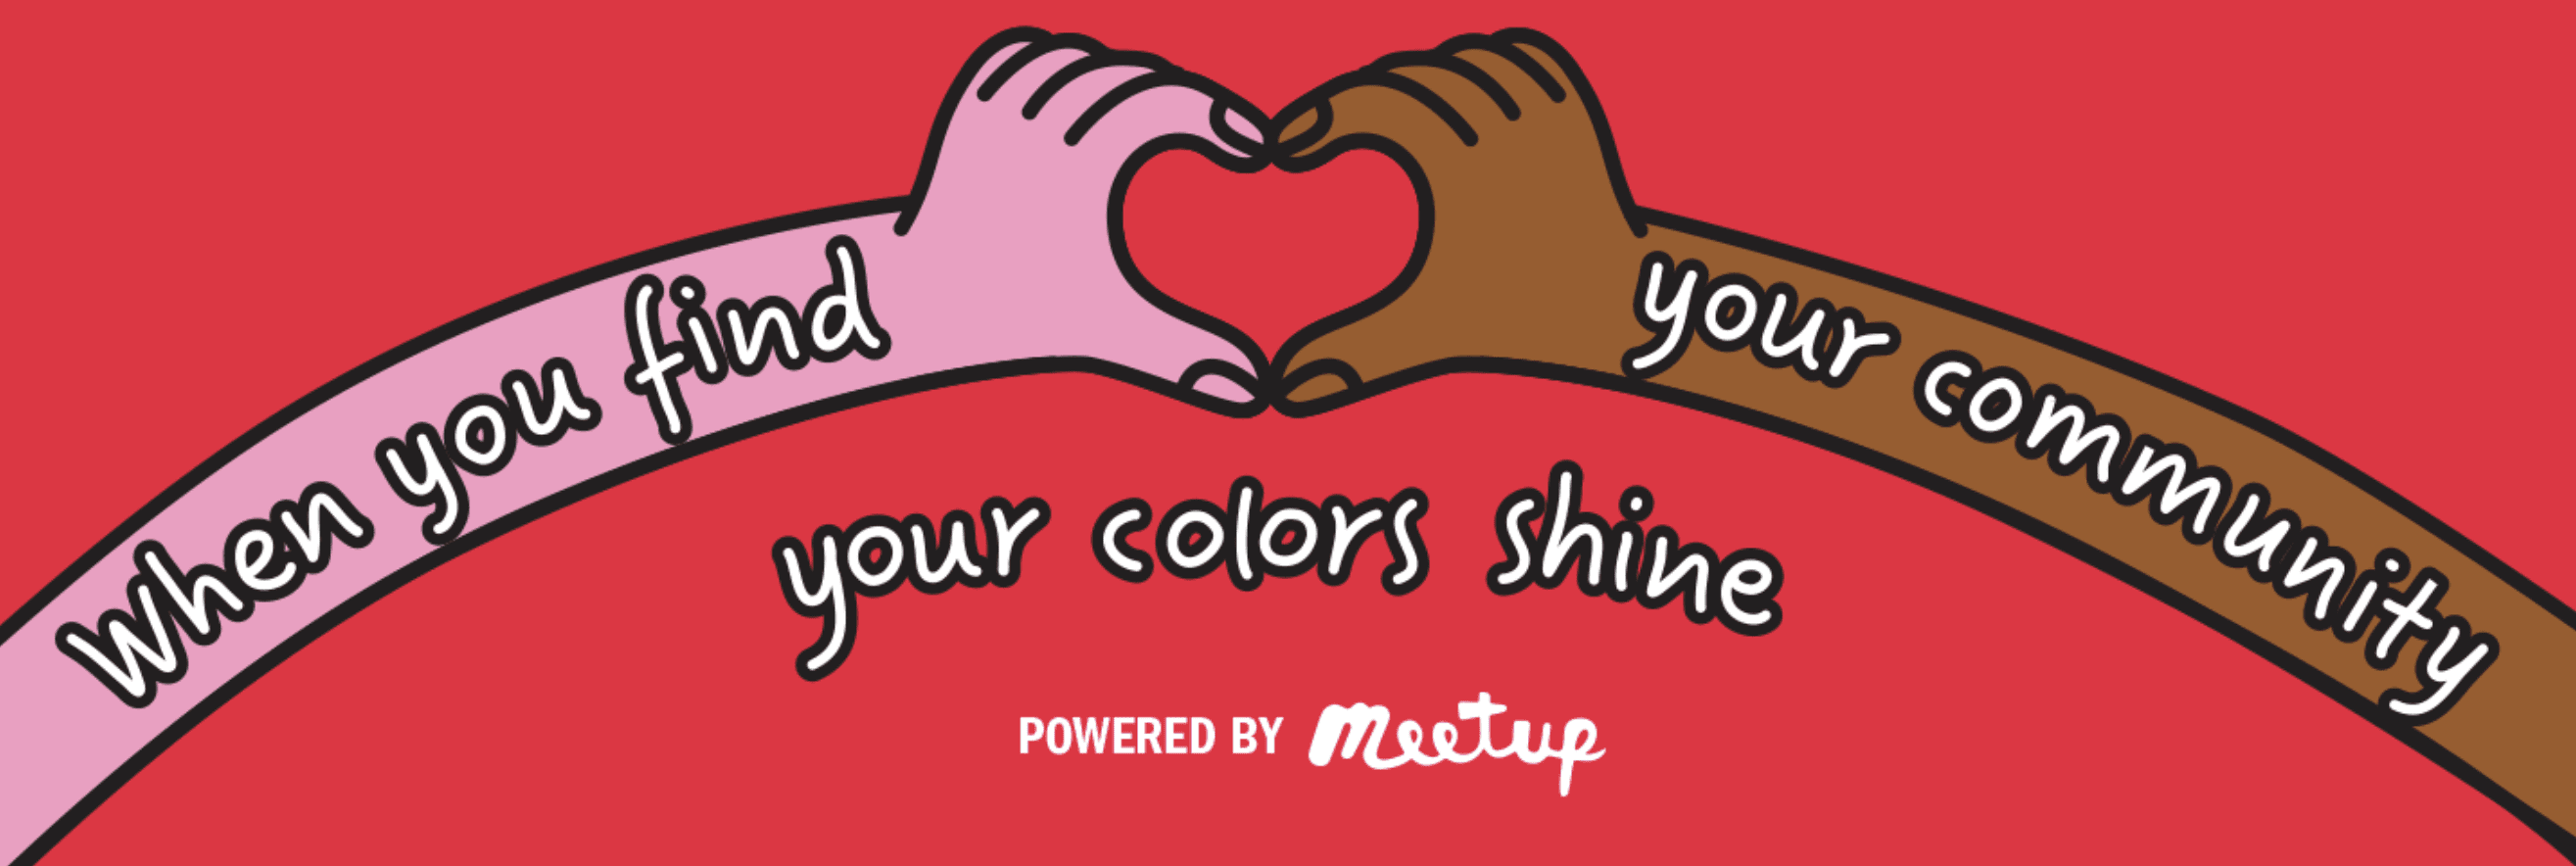 Screenshot of two illustrated hands meeting to form a heart with the words "When you find your community your colors shine."